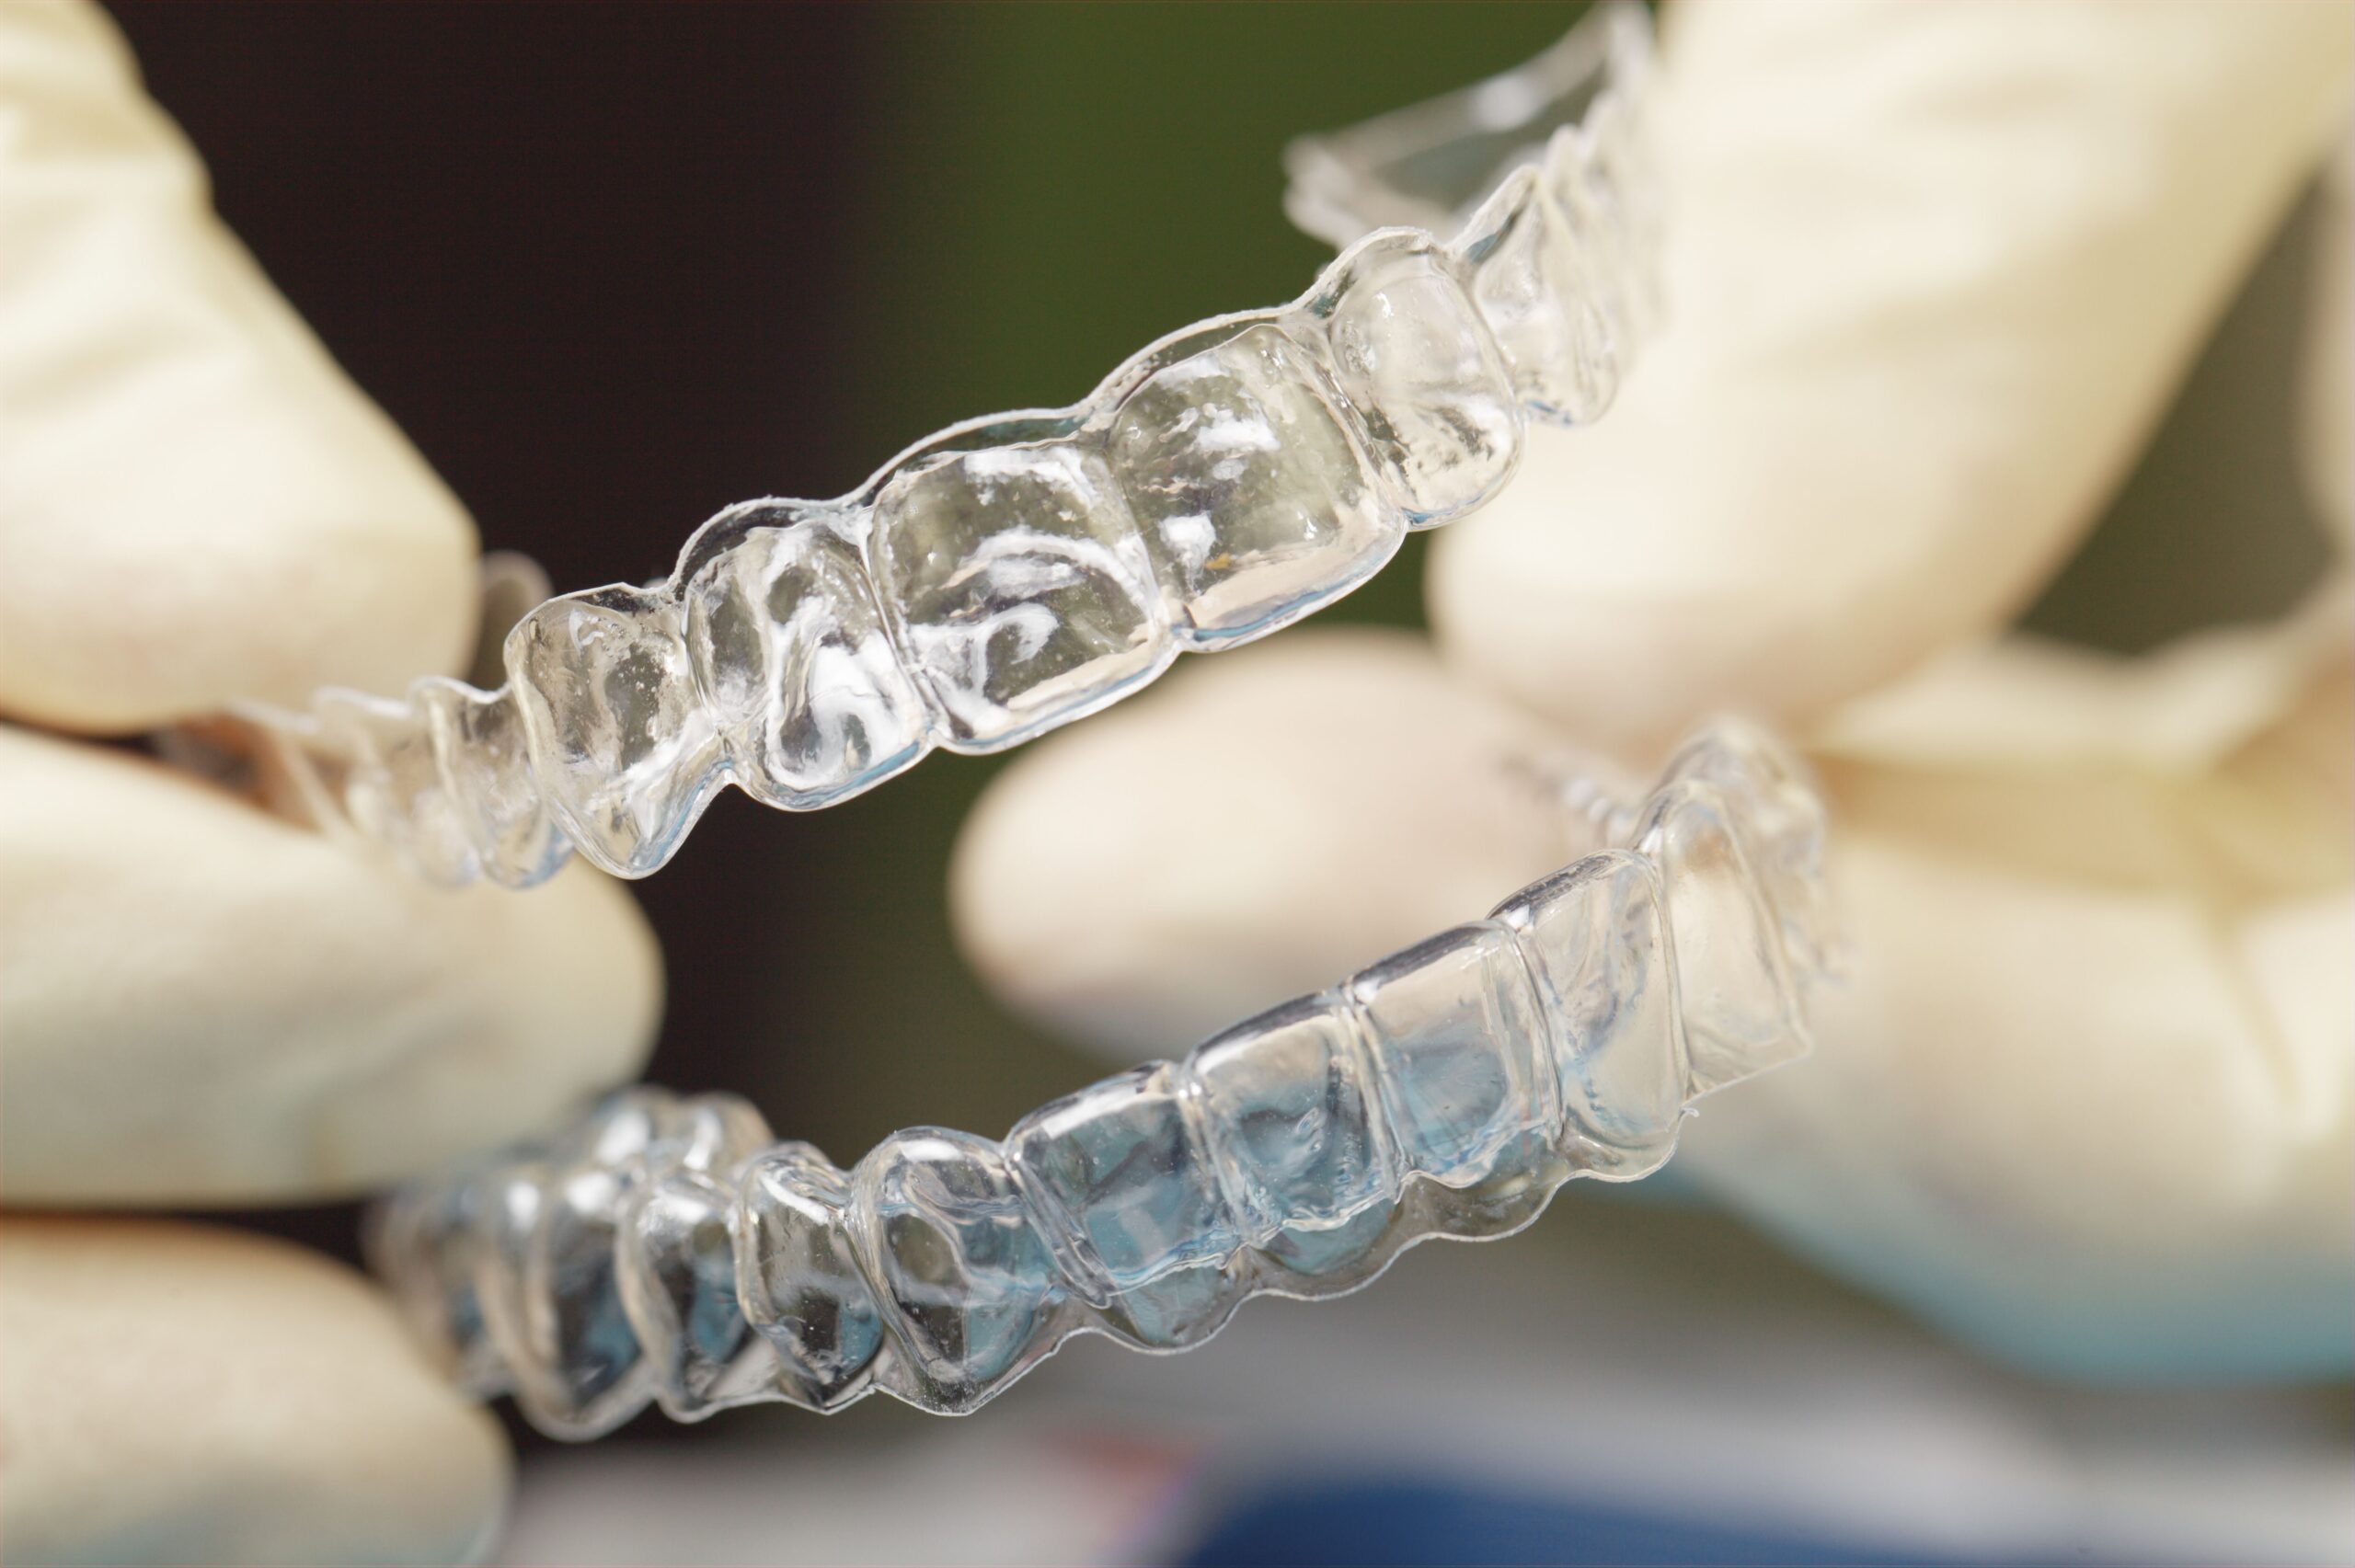 How to Store and Clean Your Retainer Properly